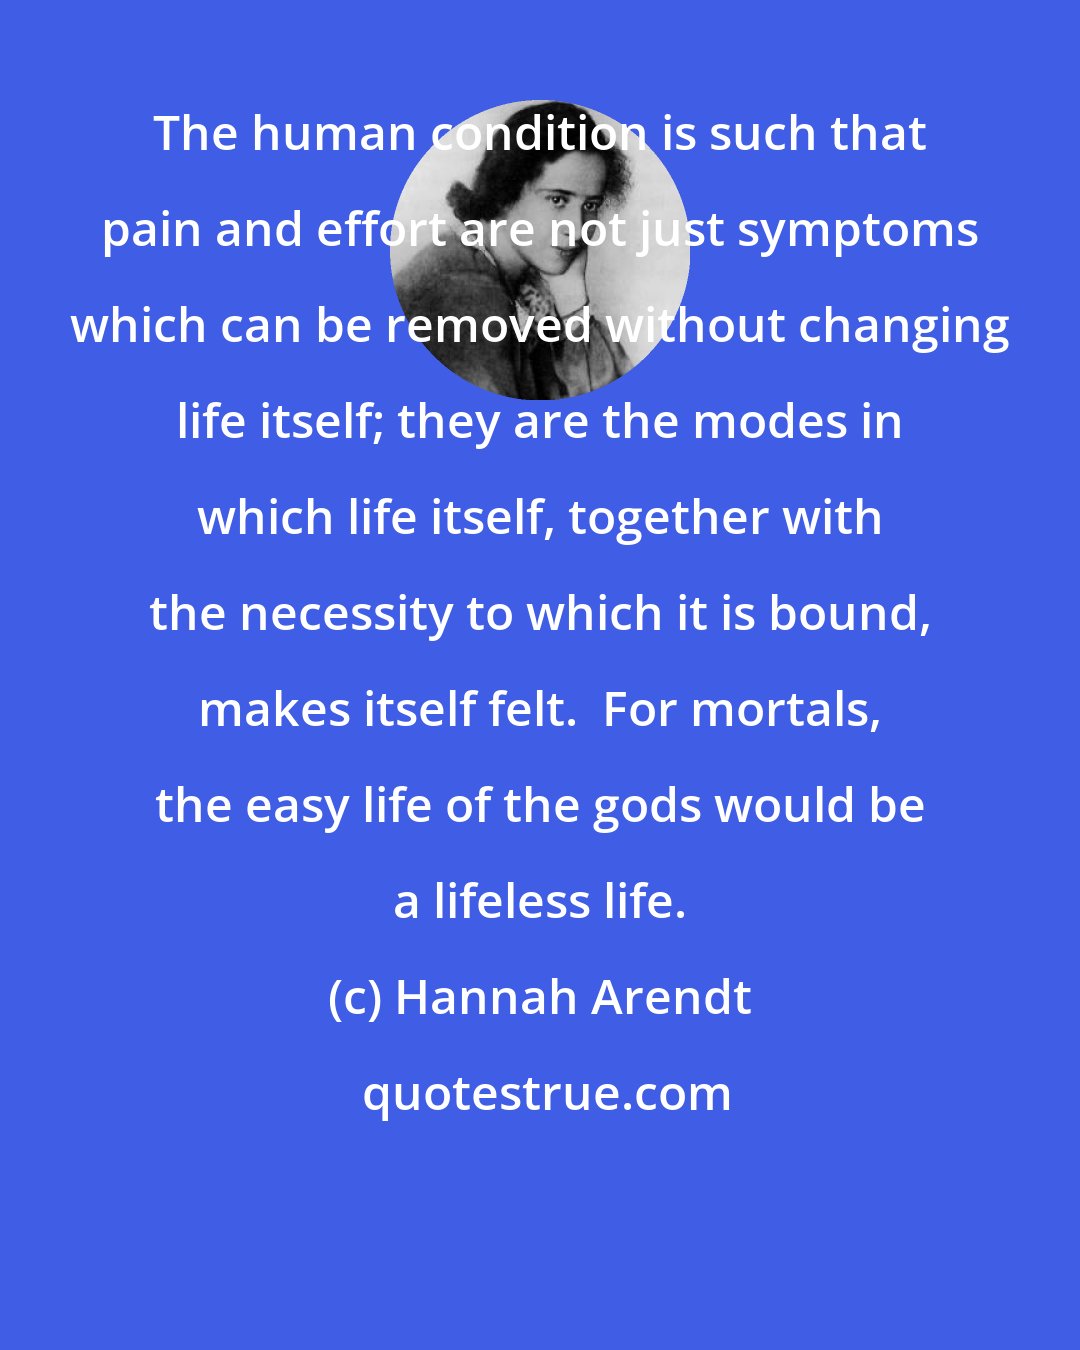 Hannah Arendt: The human condition is such that pain and effort are not just symptoms which can be removed without changing life itself; they are the modes in which life itself, together with the necessity to which it is bound, makes itself felt.  For mortals, the easy life of the gods would be a lifeless life.